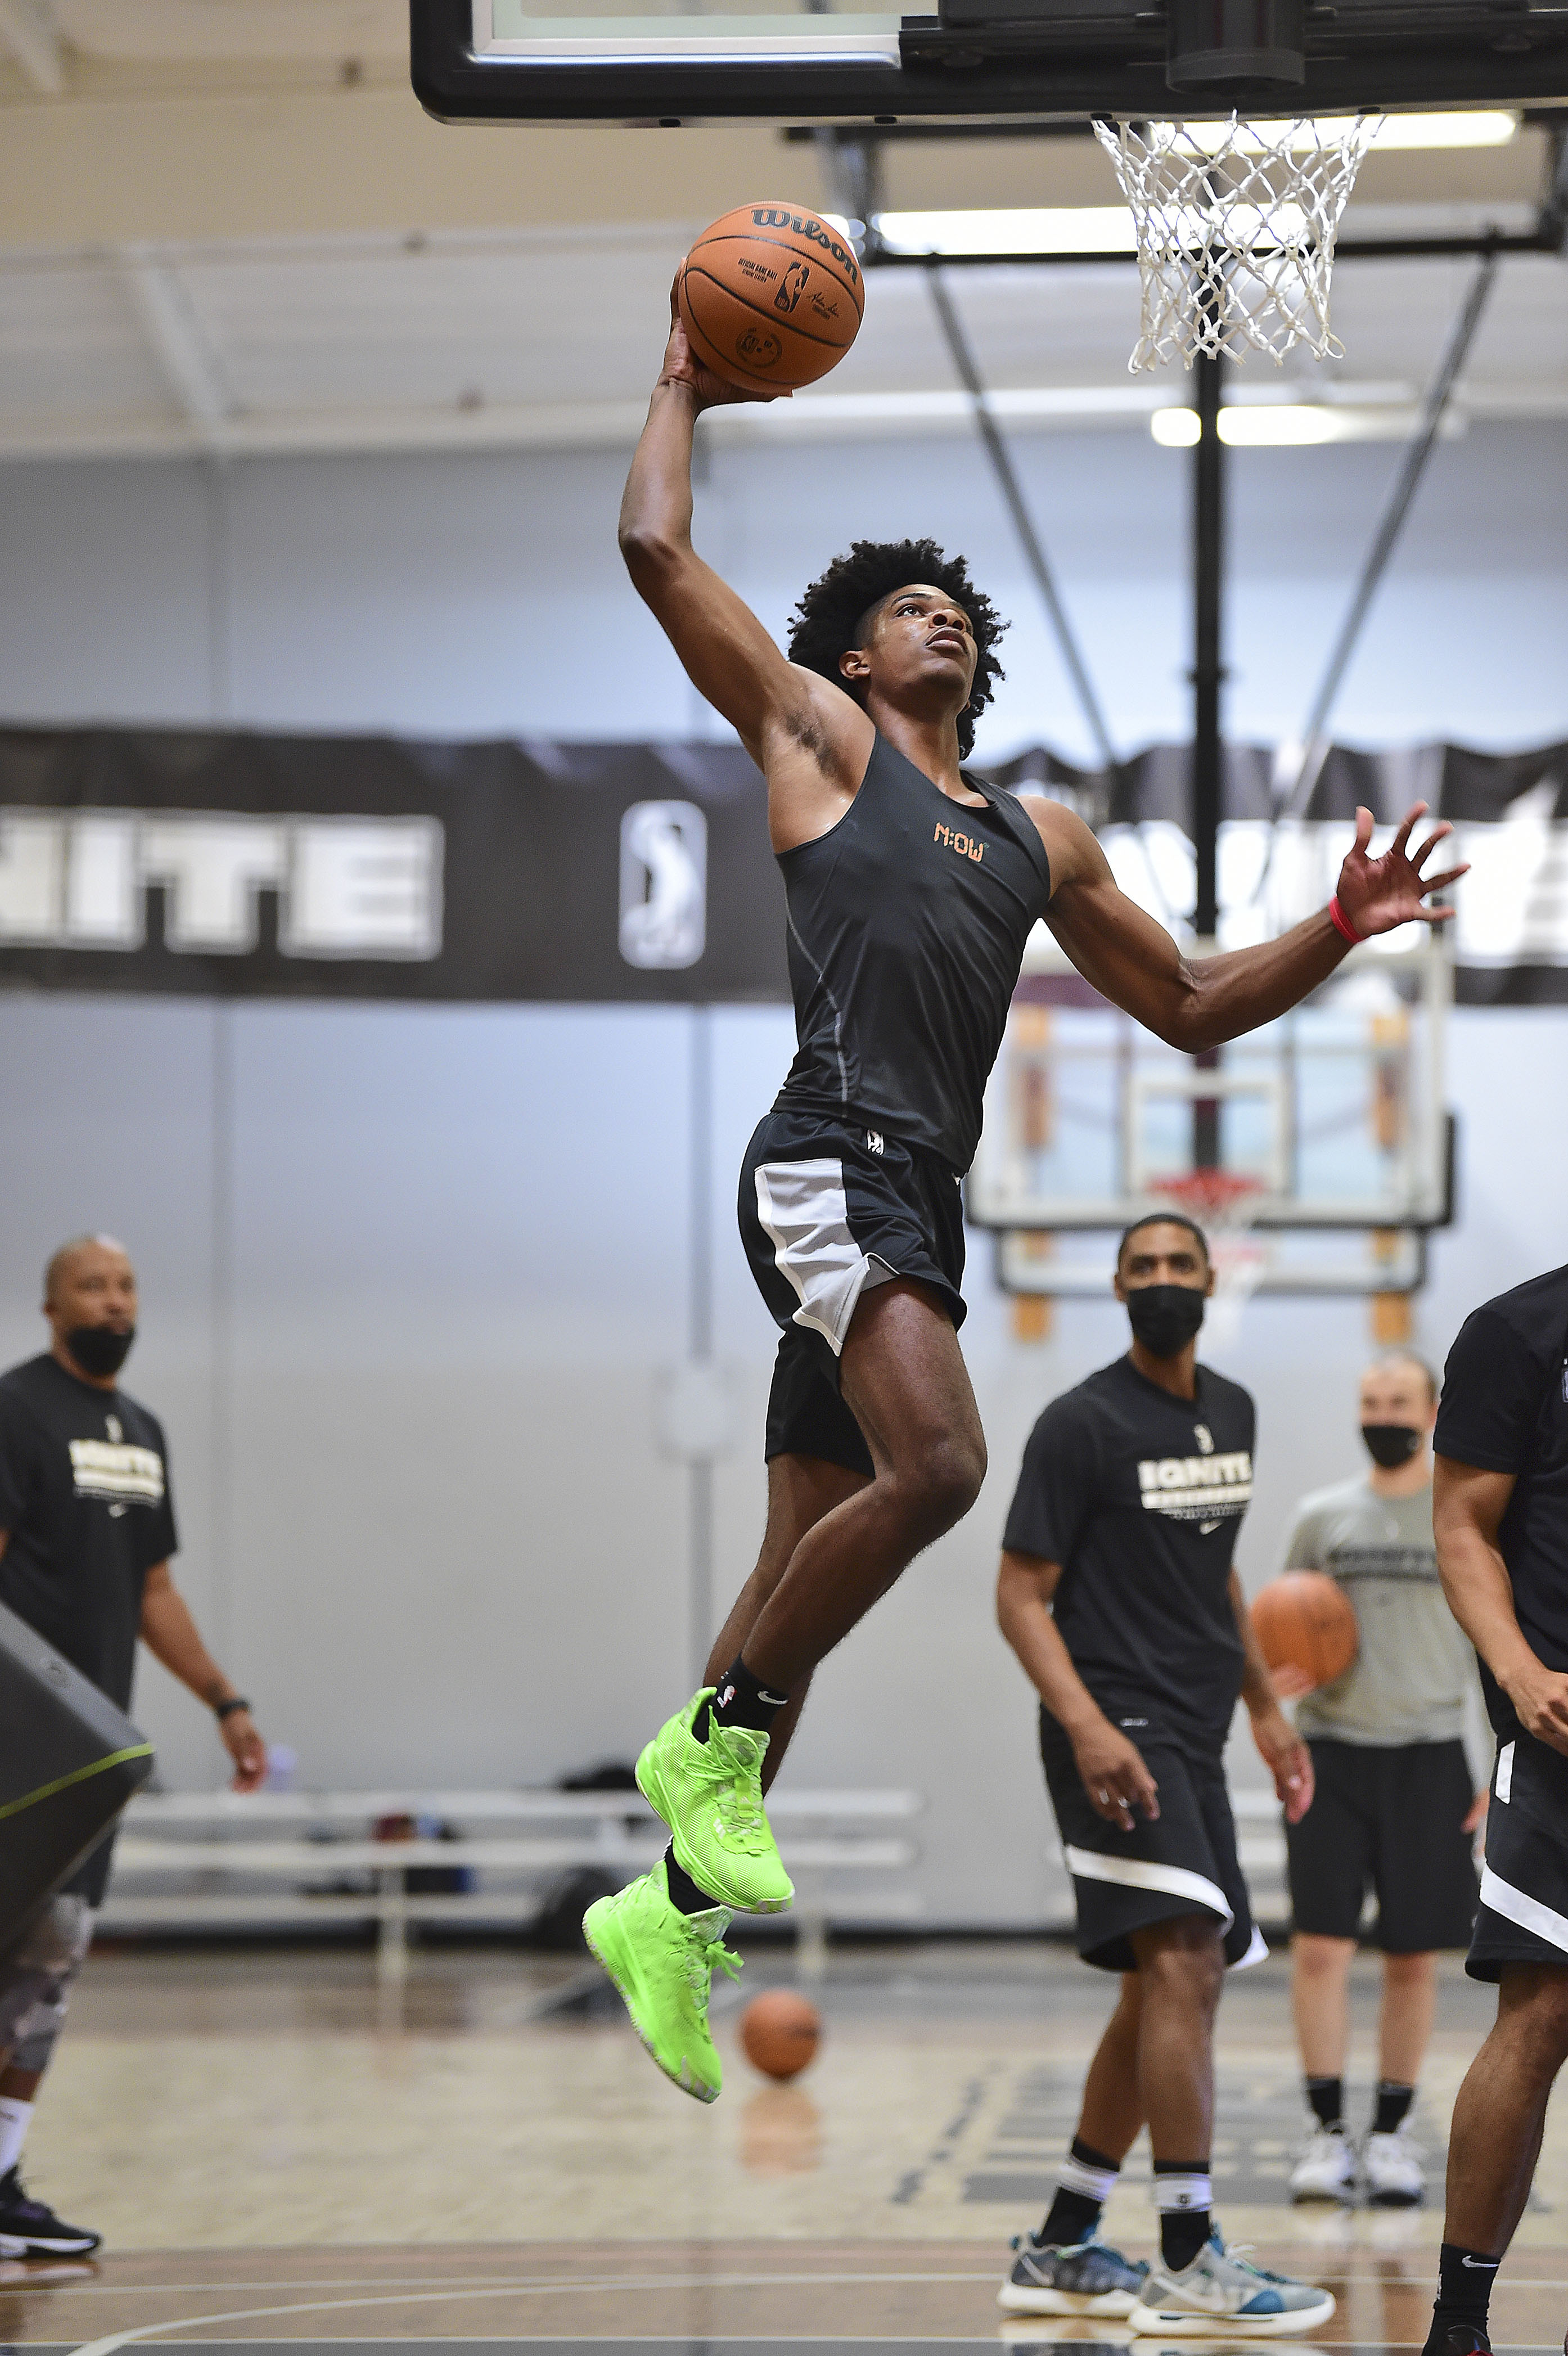 Just 17, Scoot has already impressed in Ignite practices with his absurd jumping ability, NBA-ready physique and work ethic modeled on Kobe Bryant.